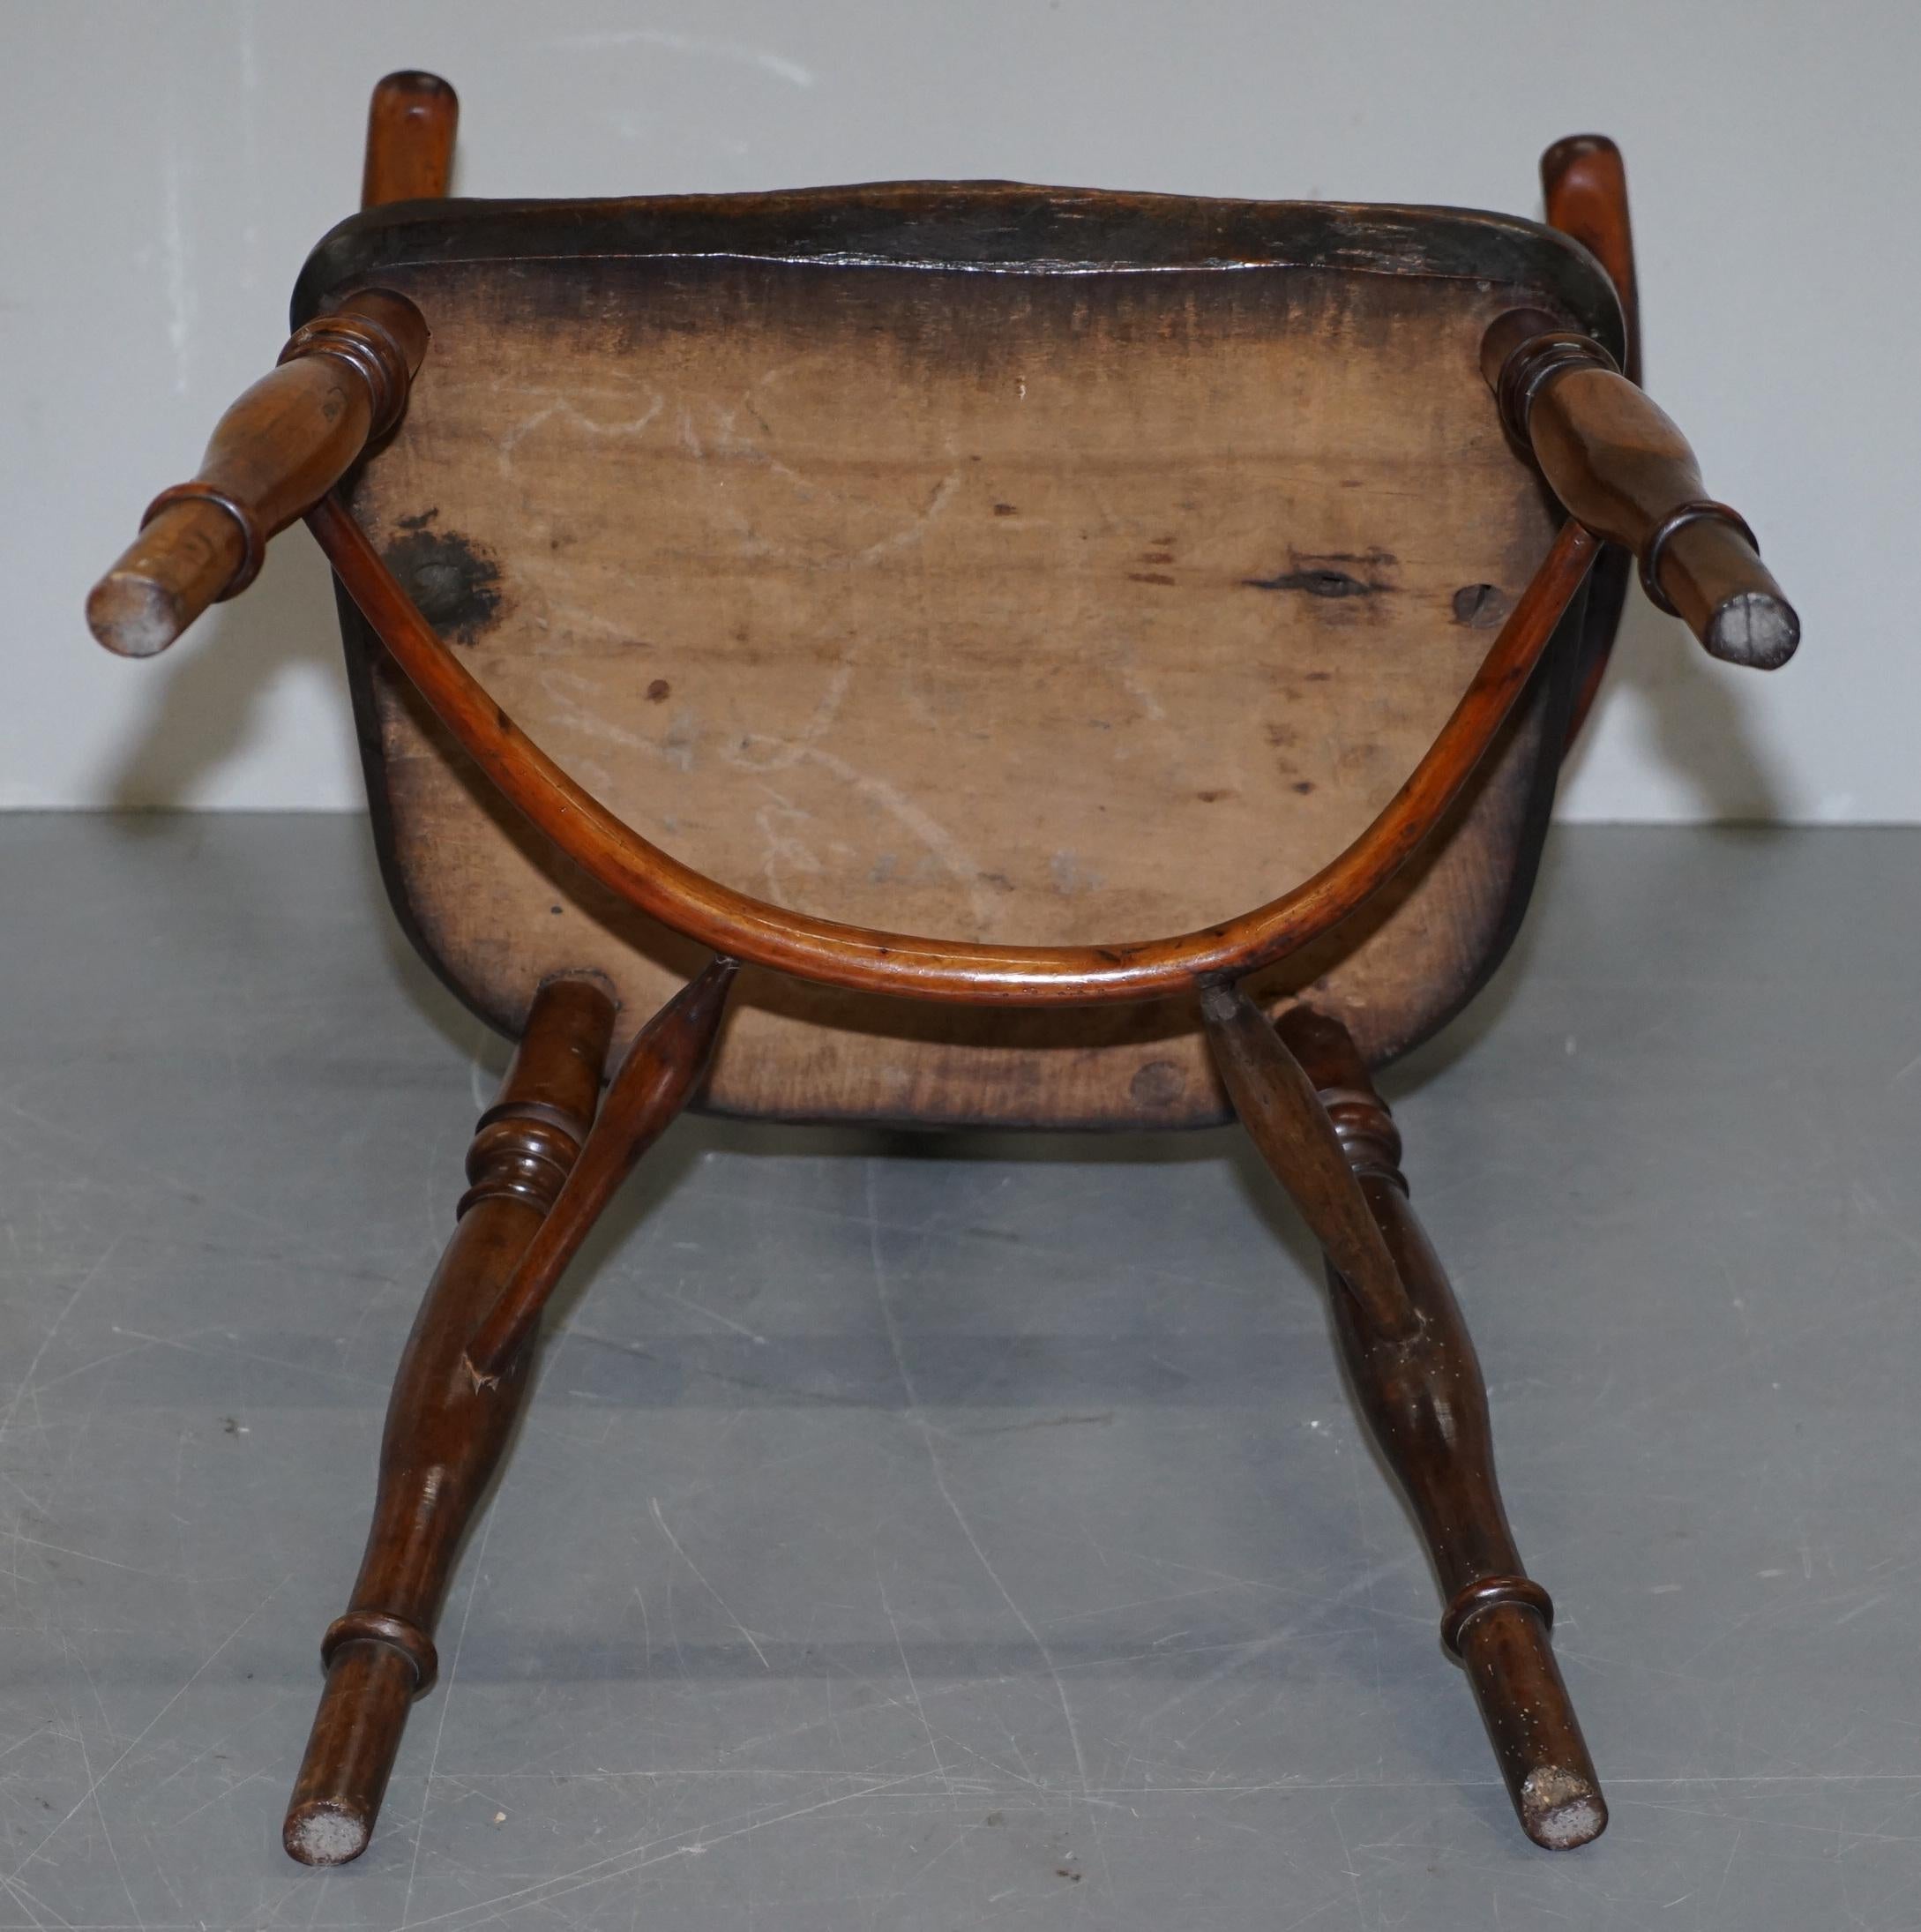 1 of 6 Burr Yew Wood Windsor Armchairs circa 1860 English Countryhouse Furniture For Sale 12